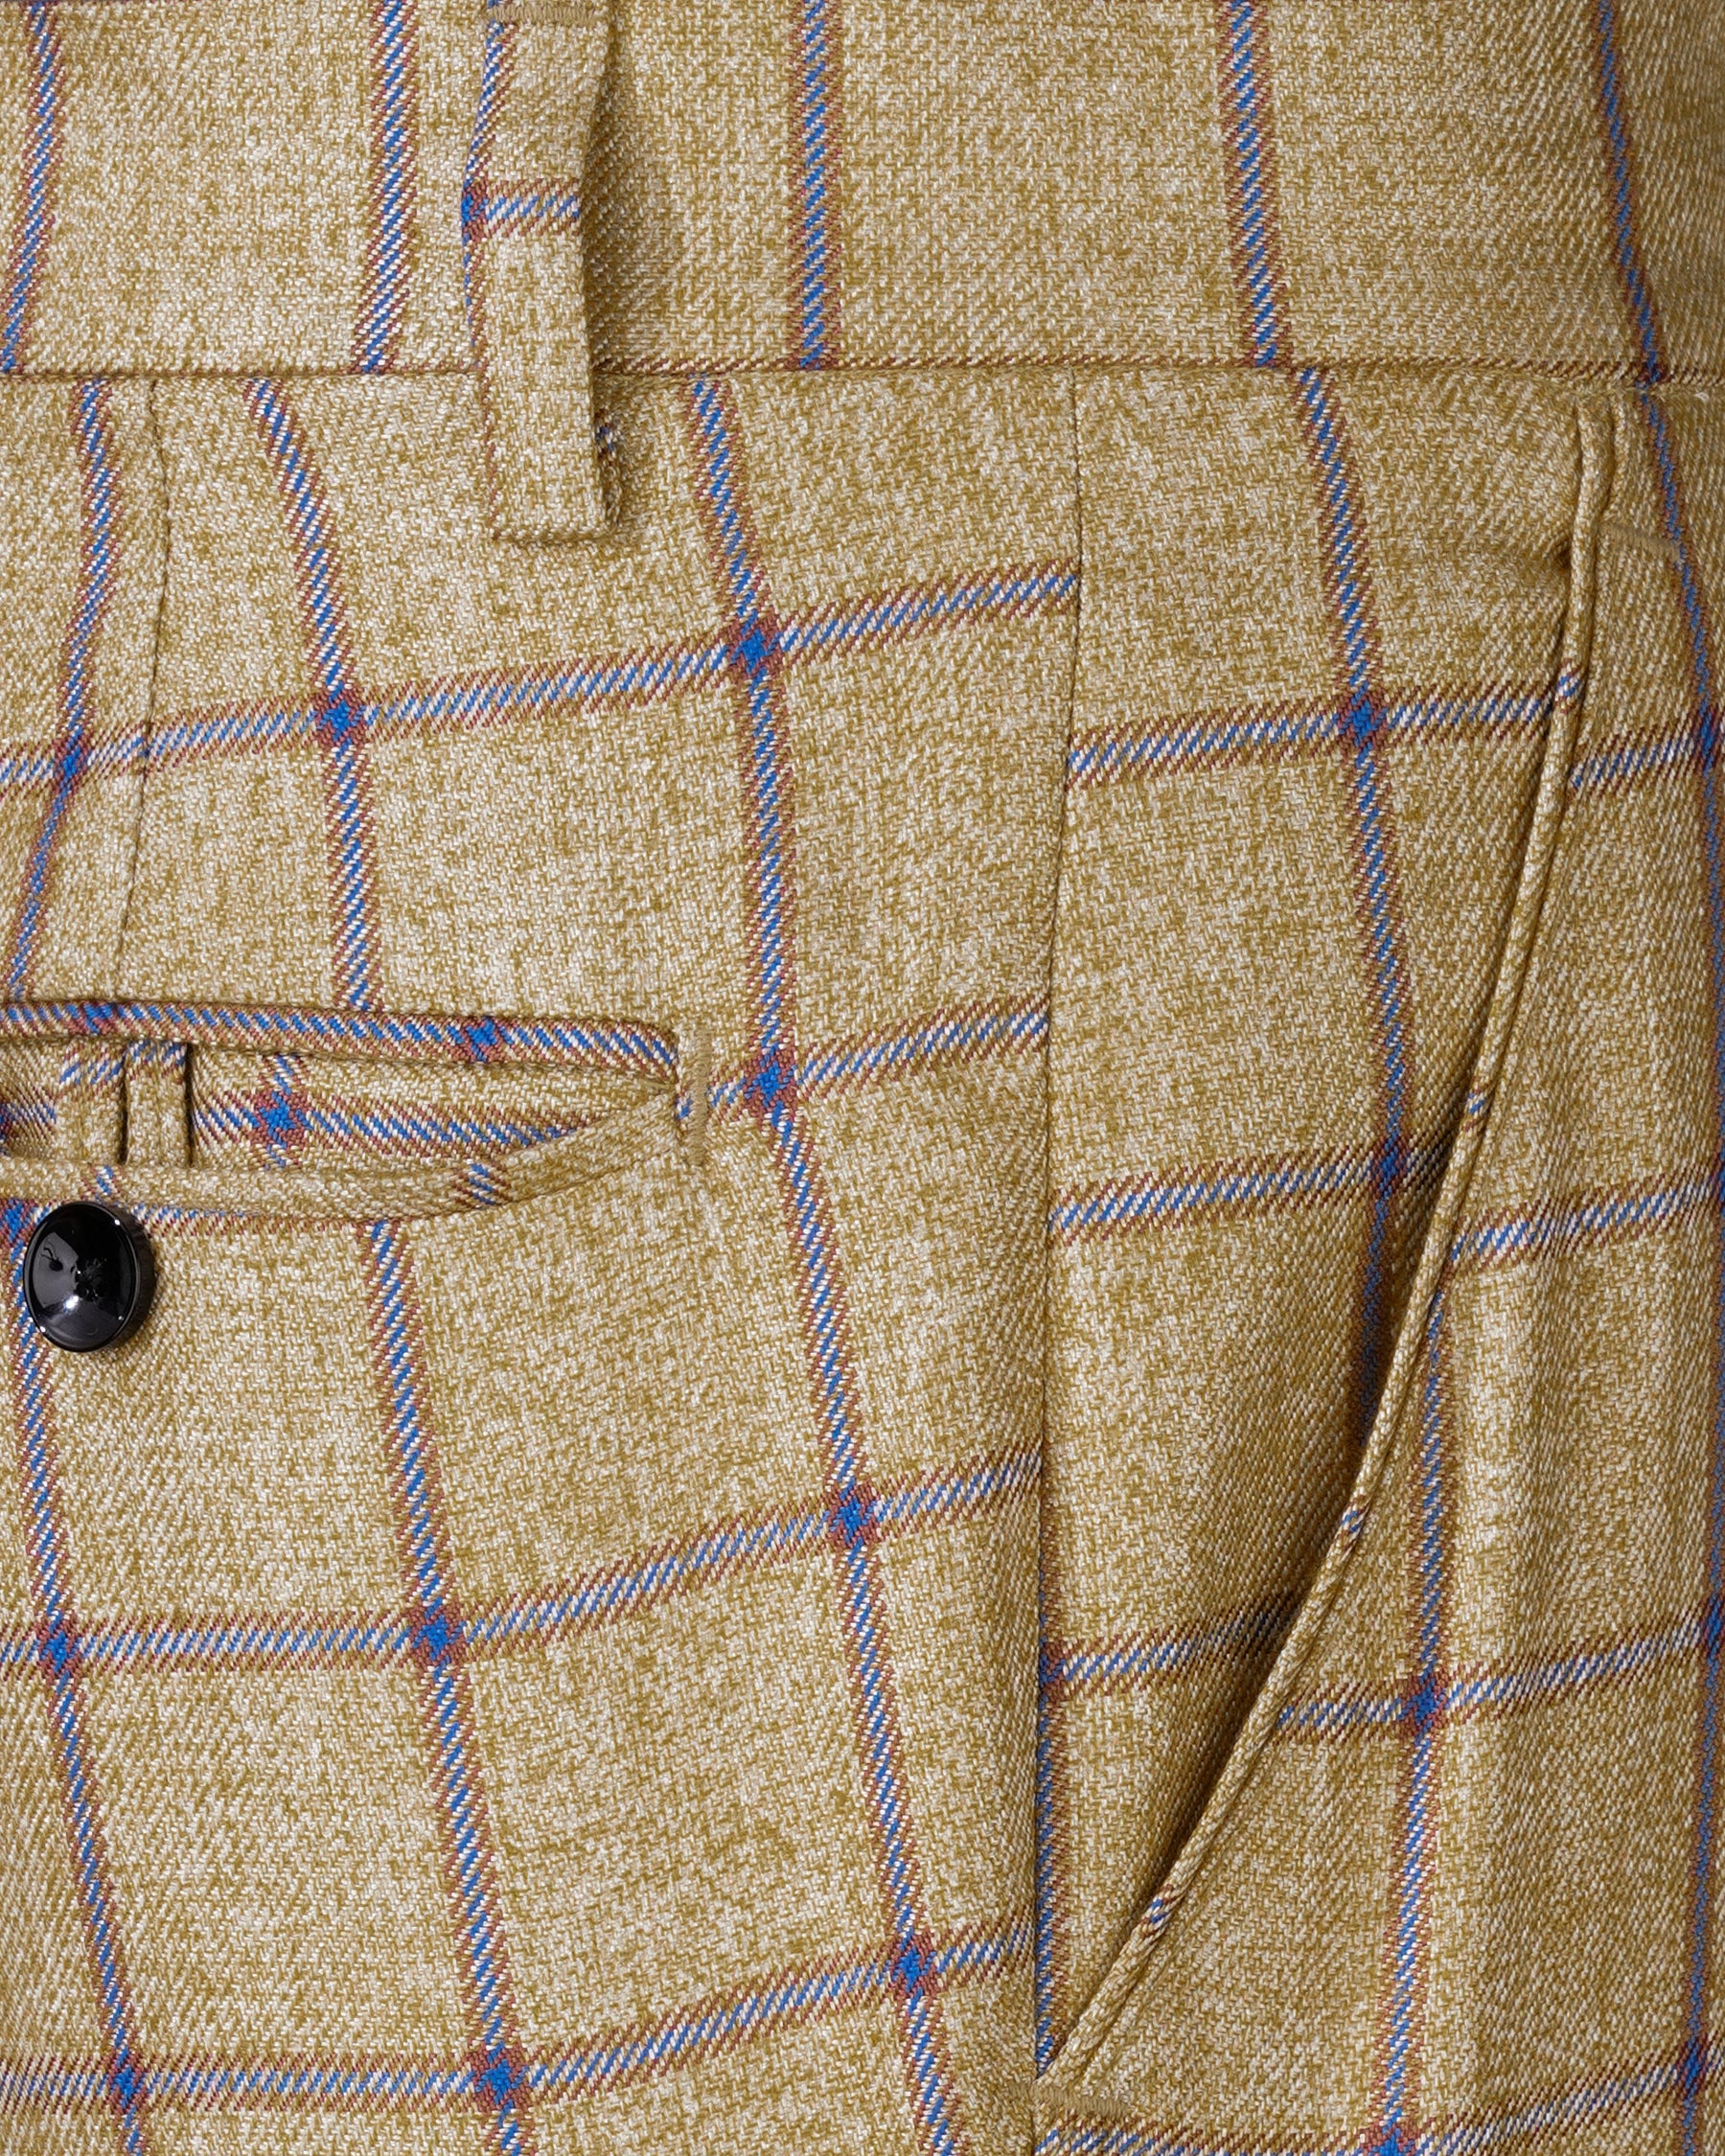 Mongoose Brown with Dianne Blue Windowpane Cross Placket Bandhgala Suit